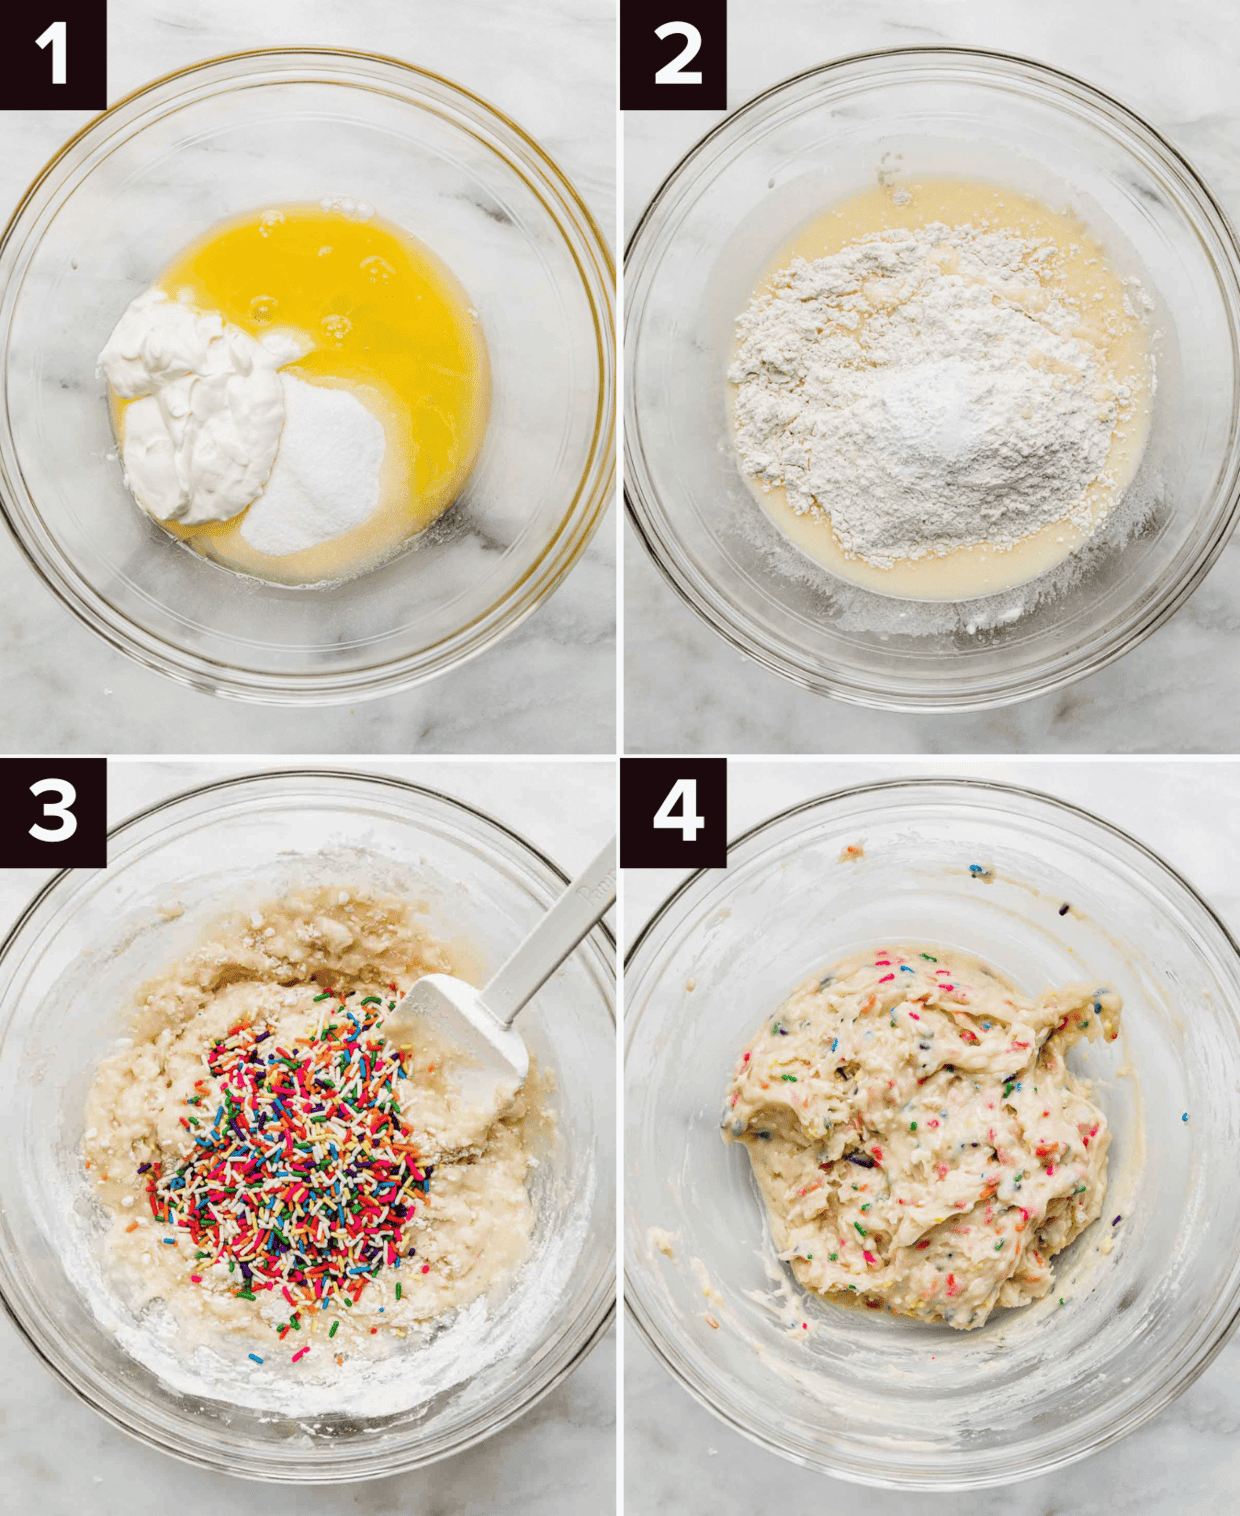 Four images showing the process of how to make funfetti donuts, top left is glass bowl with sour cream and butter in it, top right is flour on top of a yellow batter in glass bowl, bottom left is colorful sprinkles over a batter, bottom right is funfetti batter in glass bowl.